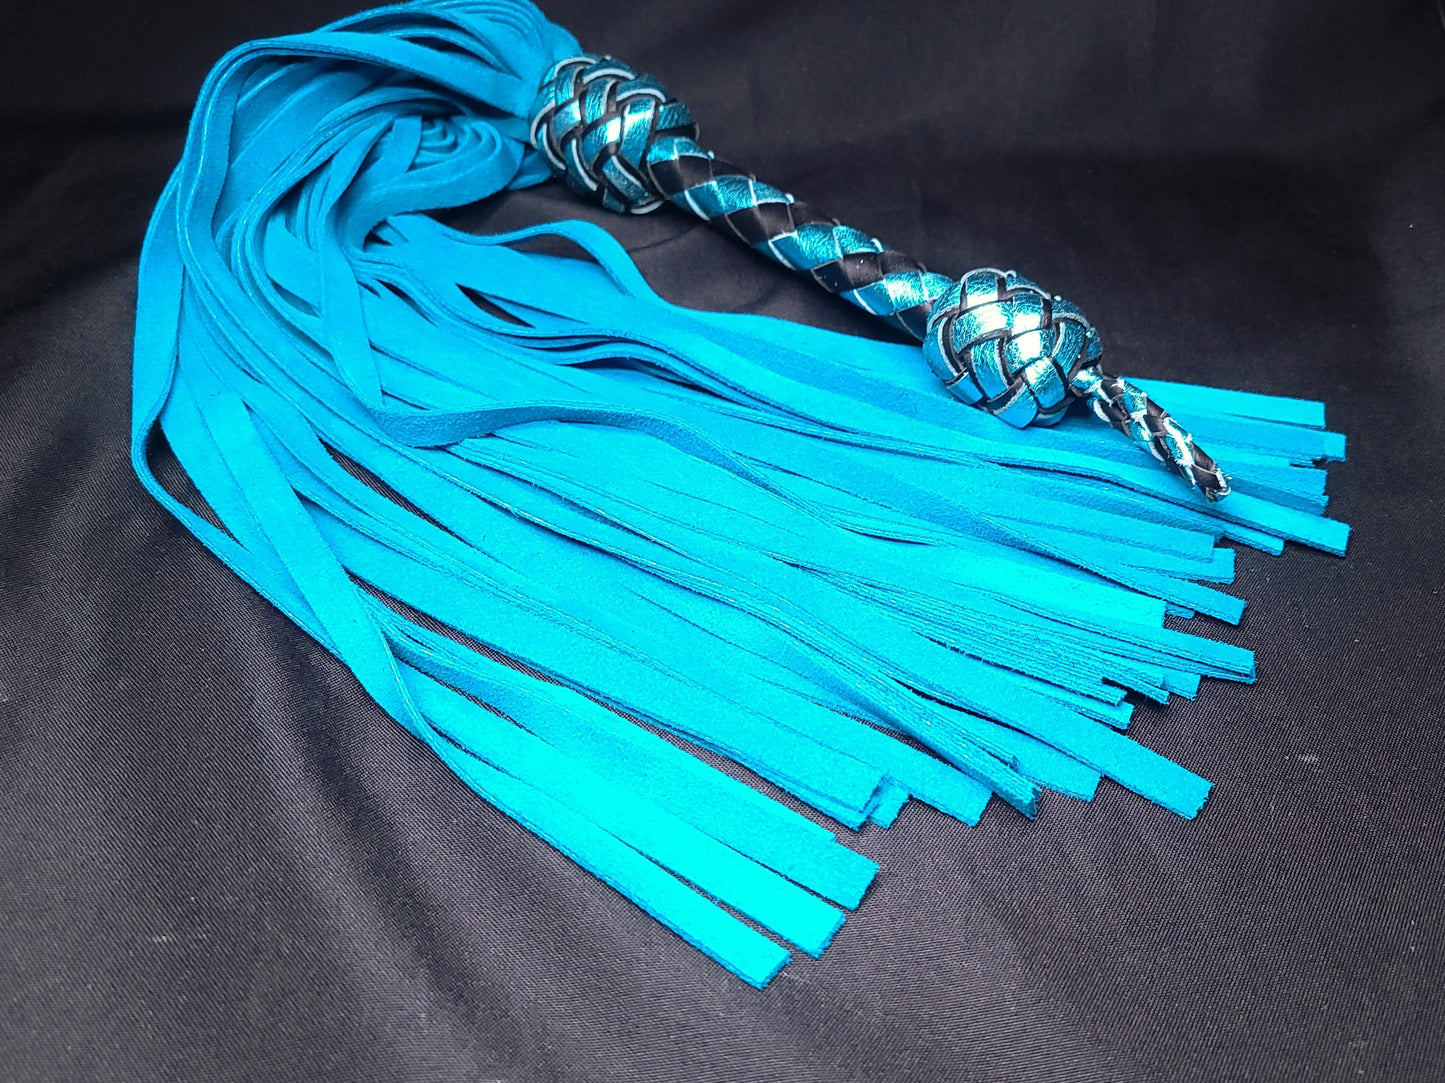 Teal Suede Flogger- In Stock